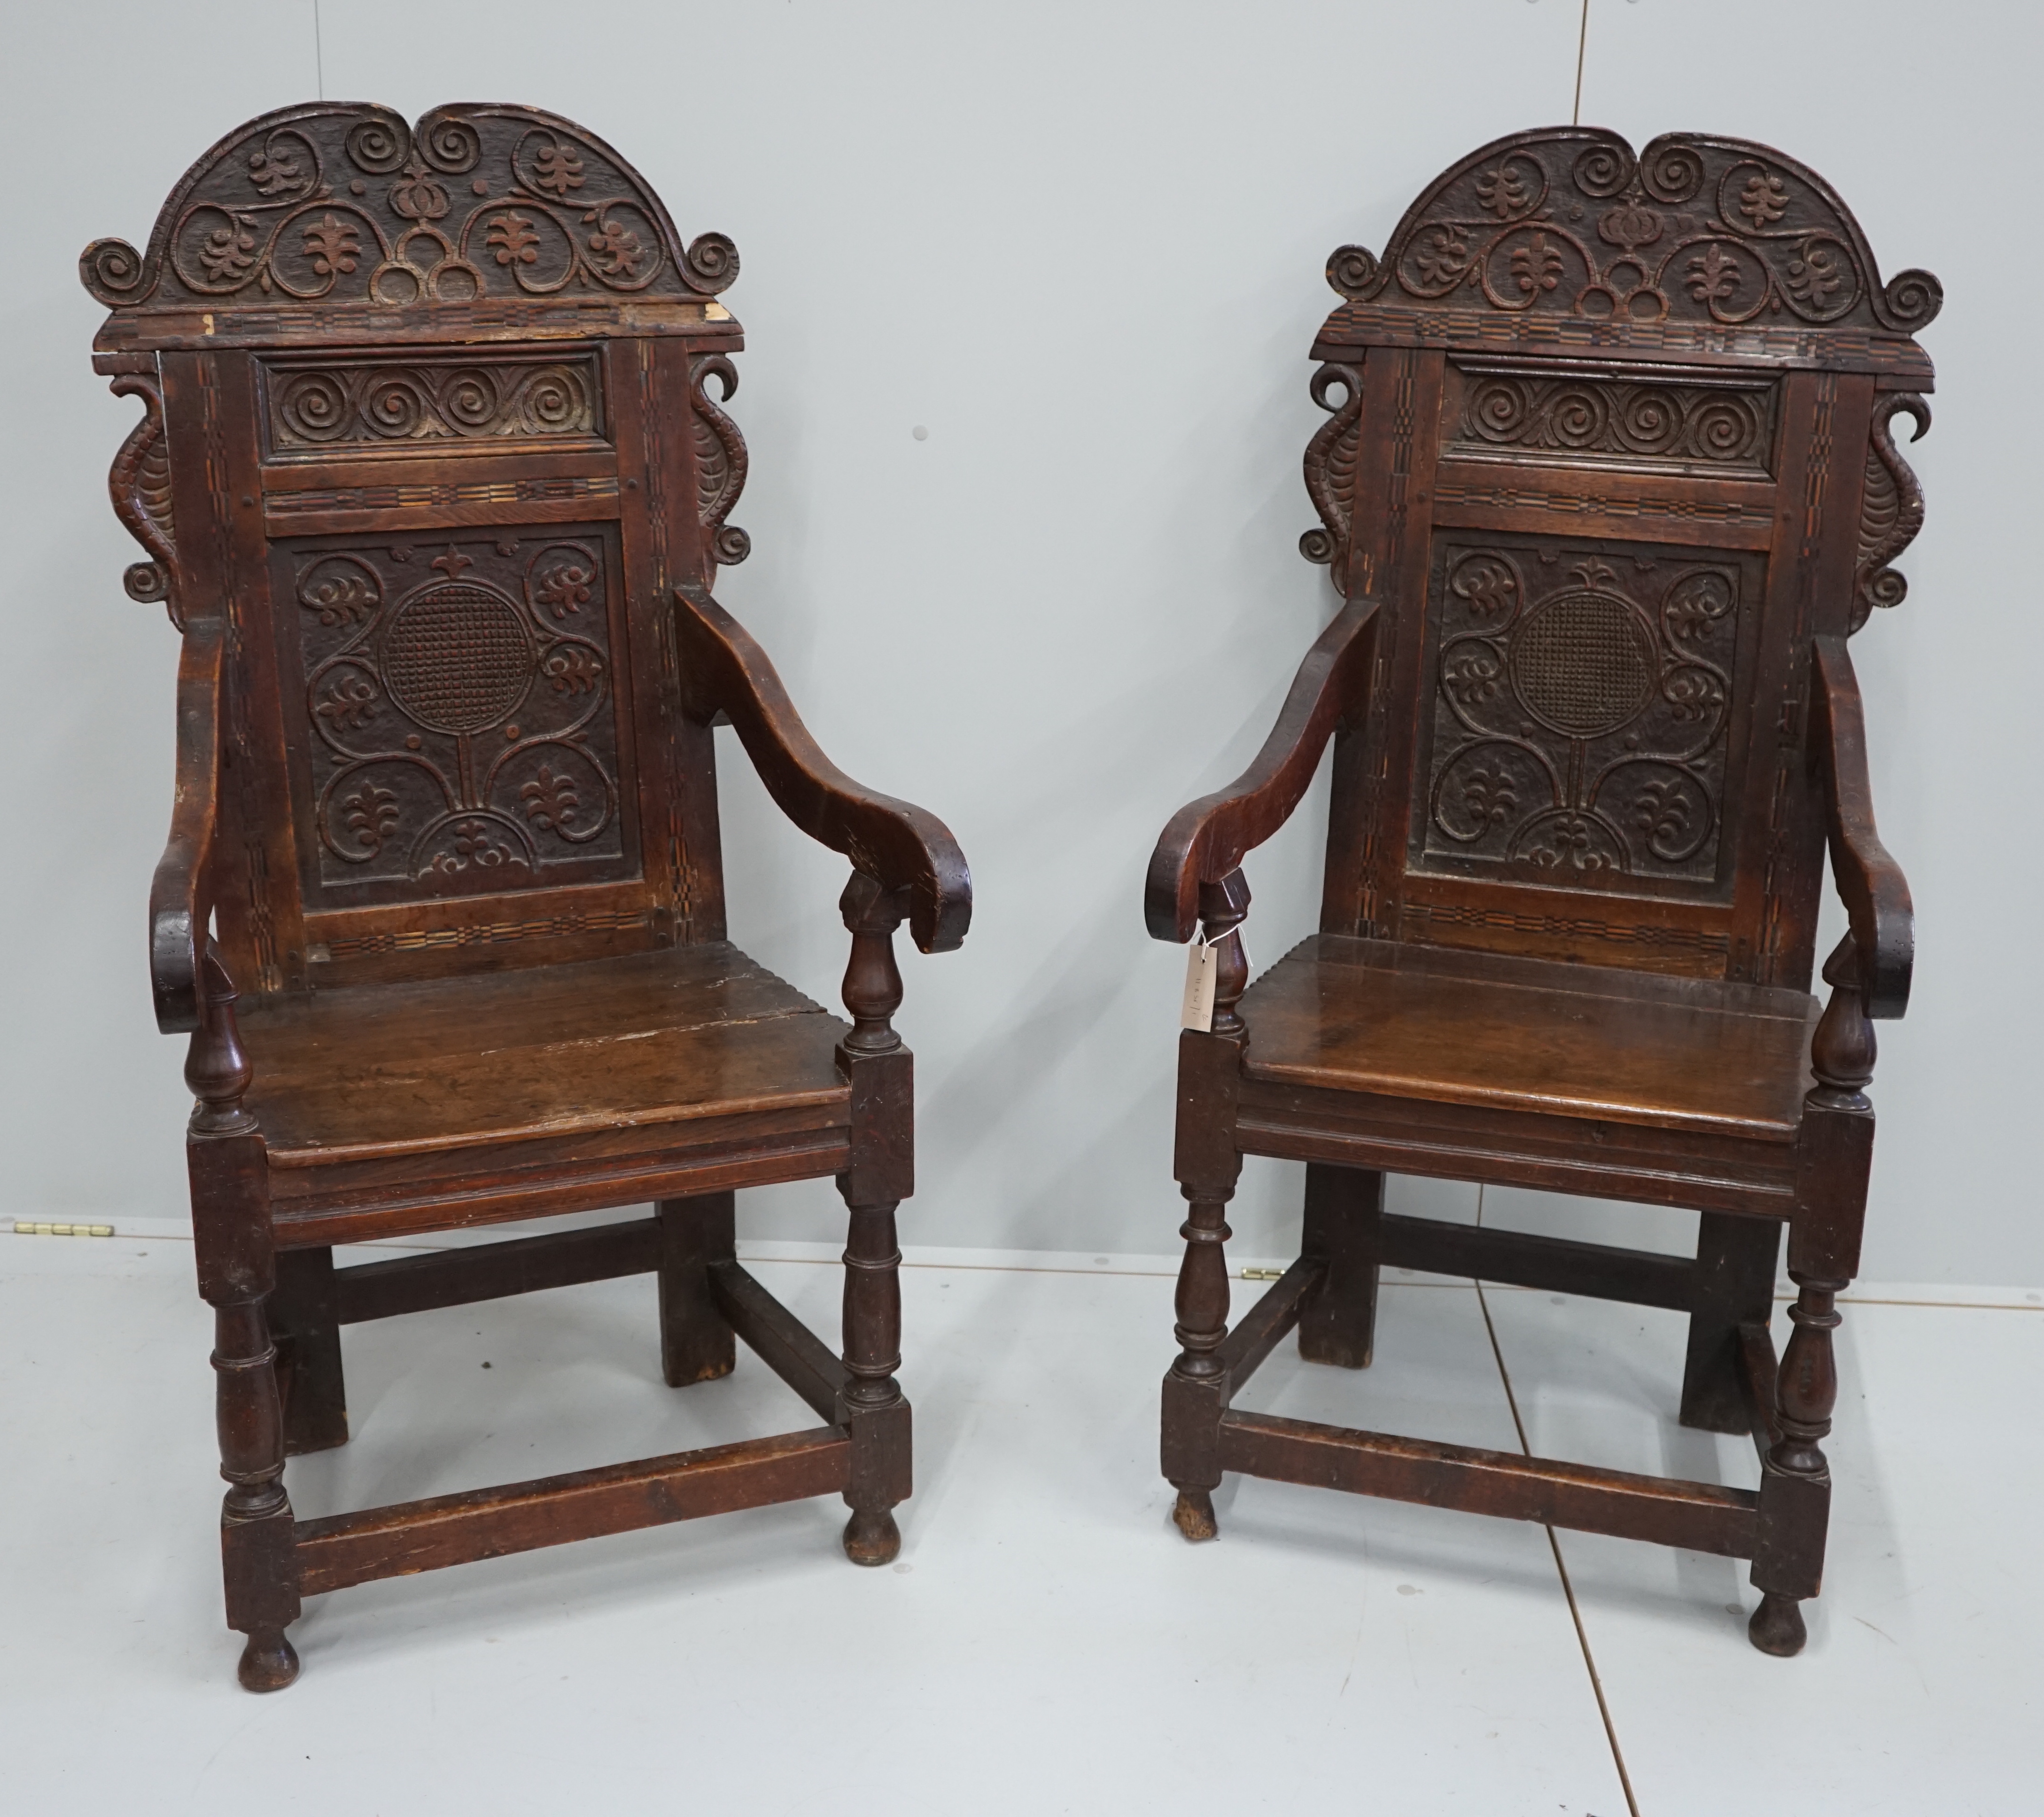 A pair of 17th century style inlaid panelled oak wainscot chairs, width 57cm, depth 40cm, height 121cm